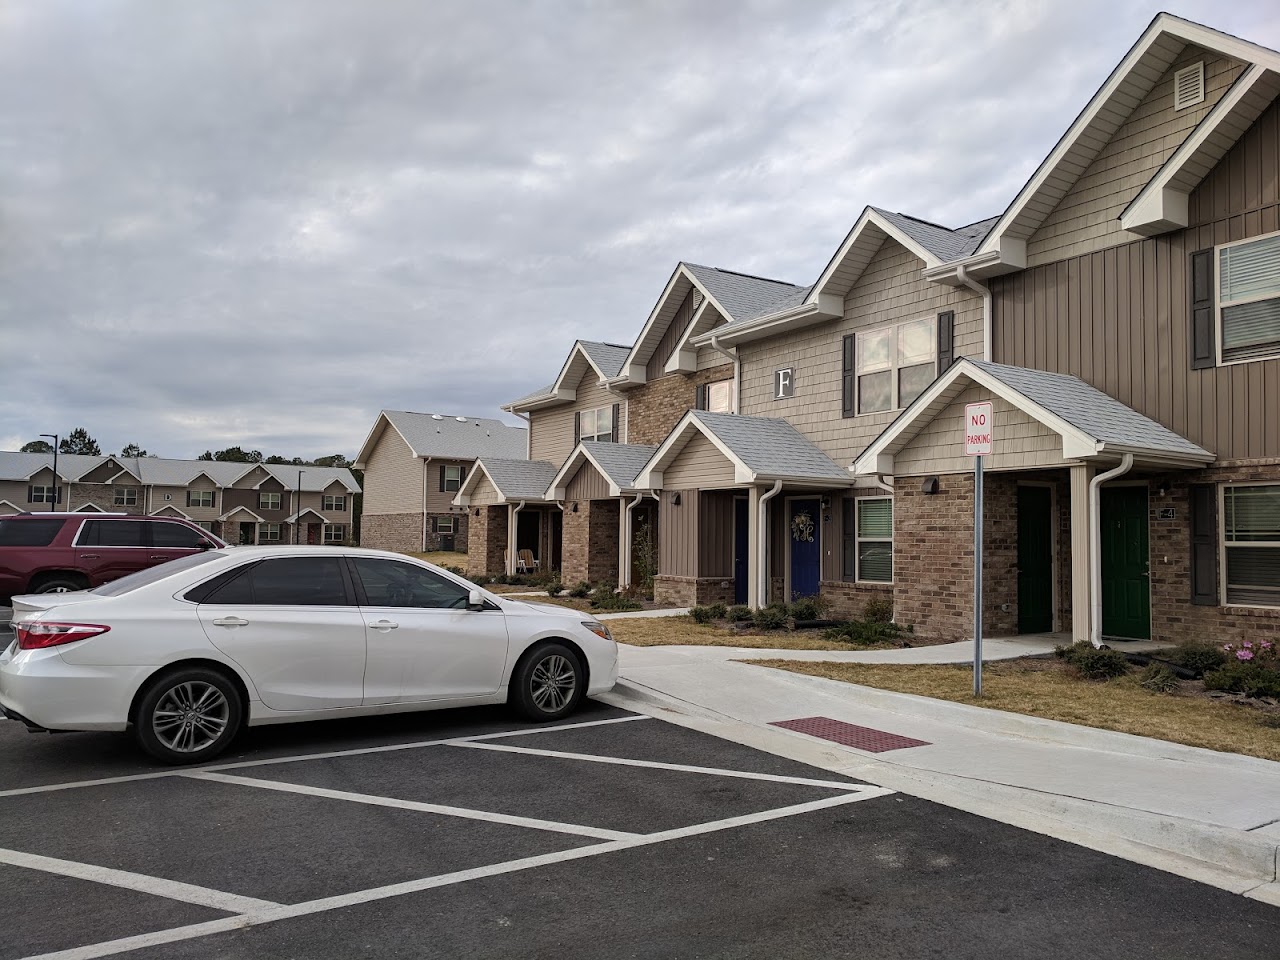 Photo of THE GROVE AT OAKMONT. Affordable housing located at 400 E WARING ST WAYCROSS, GA 31503